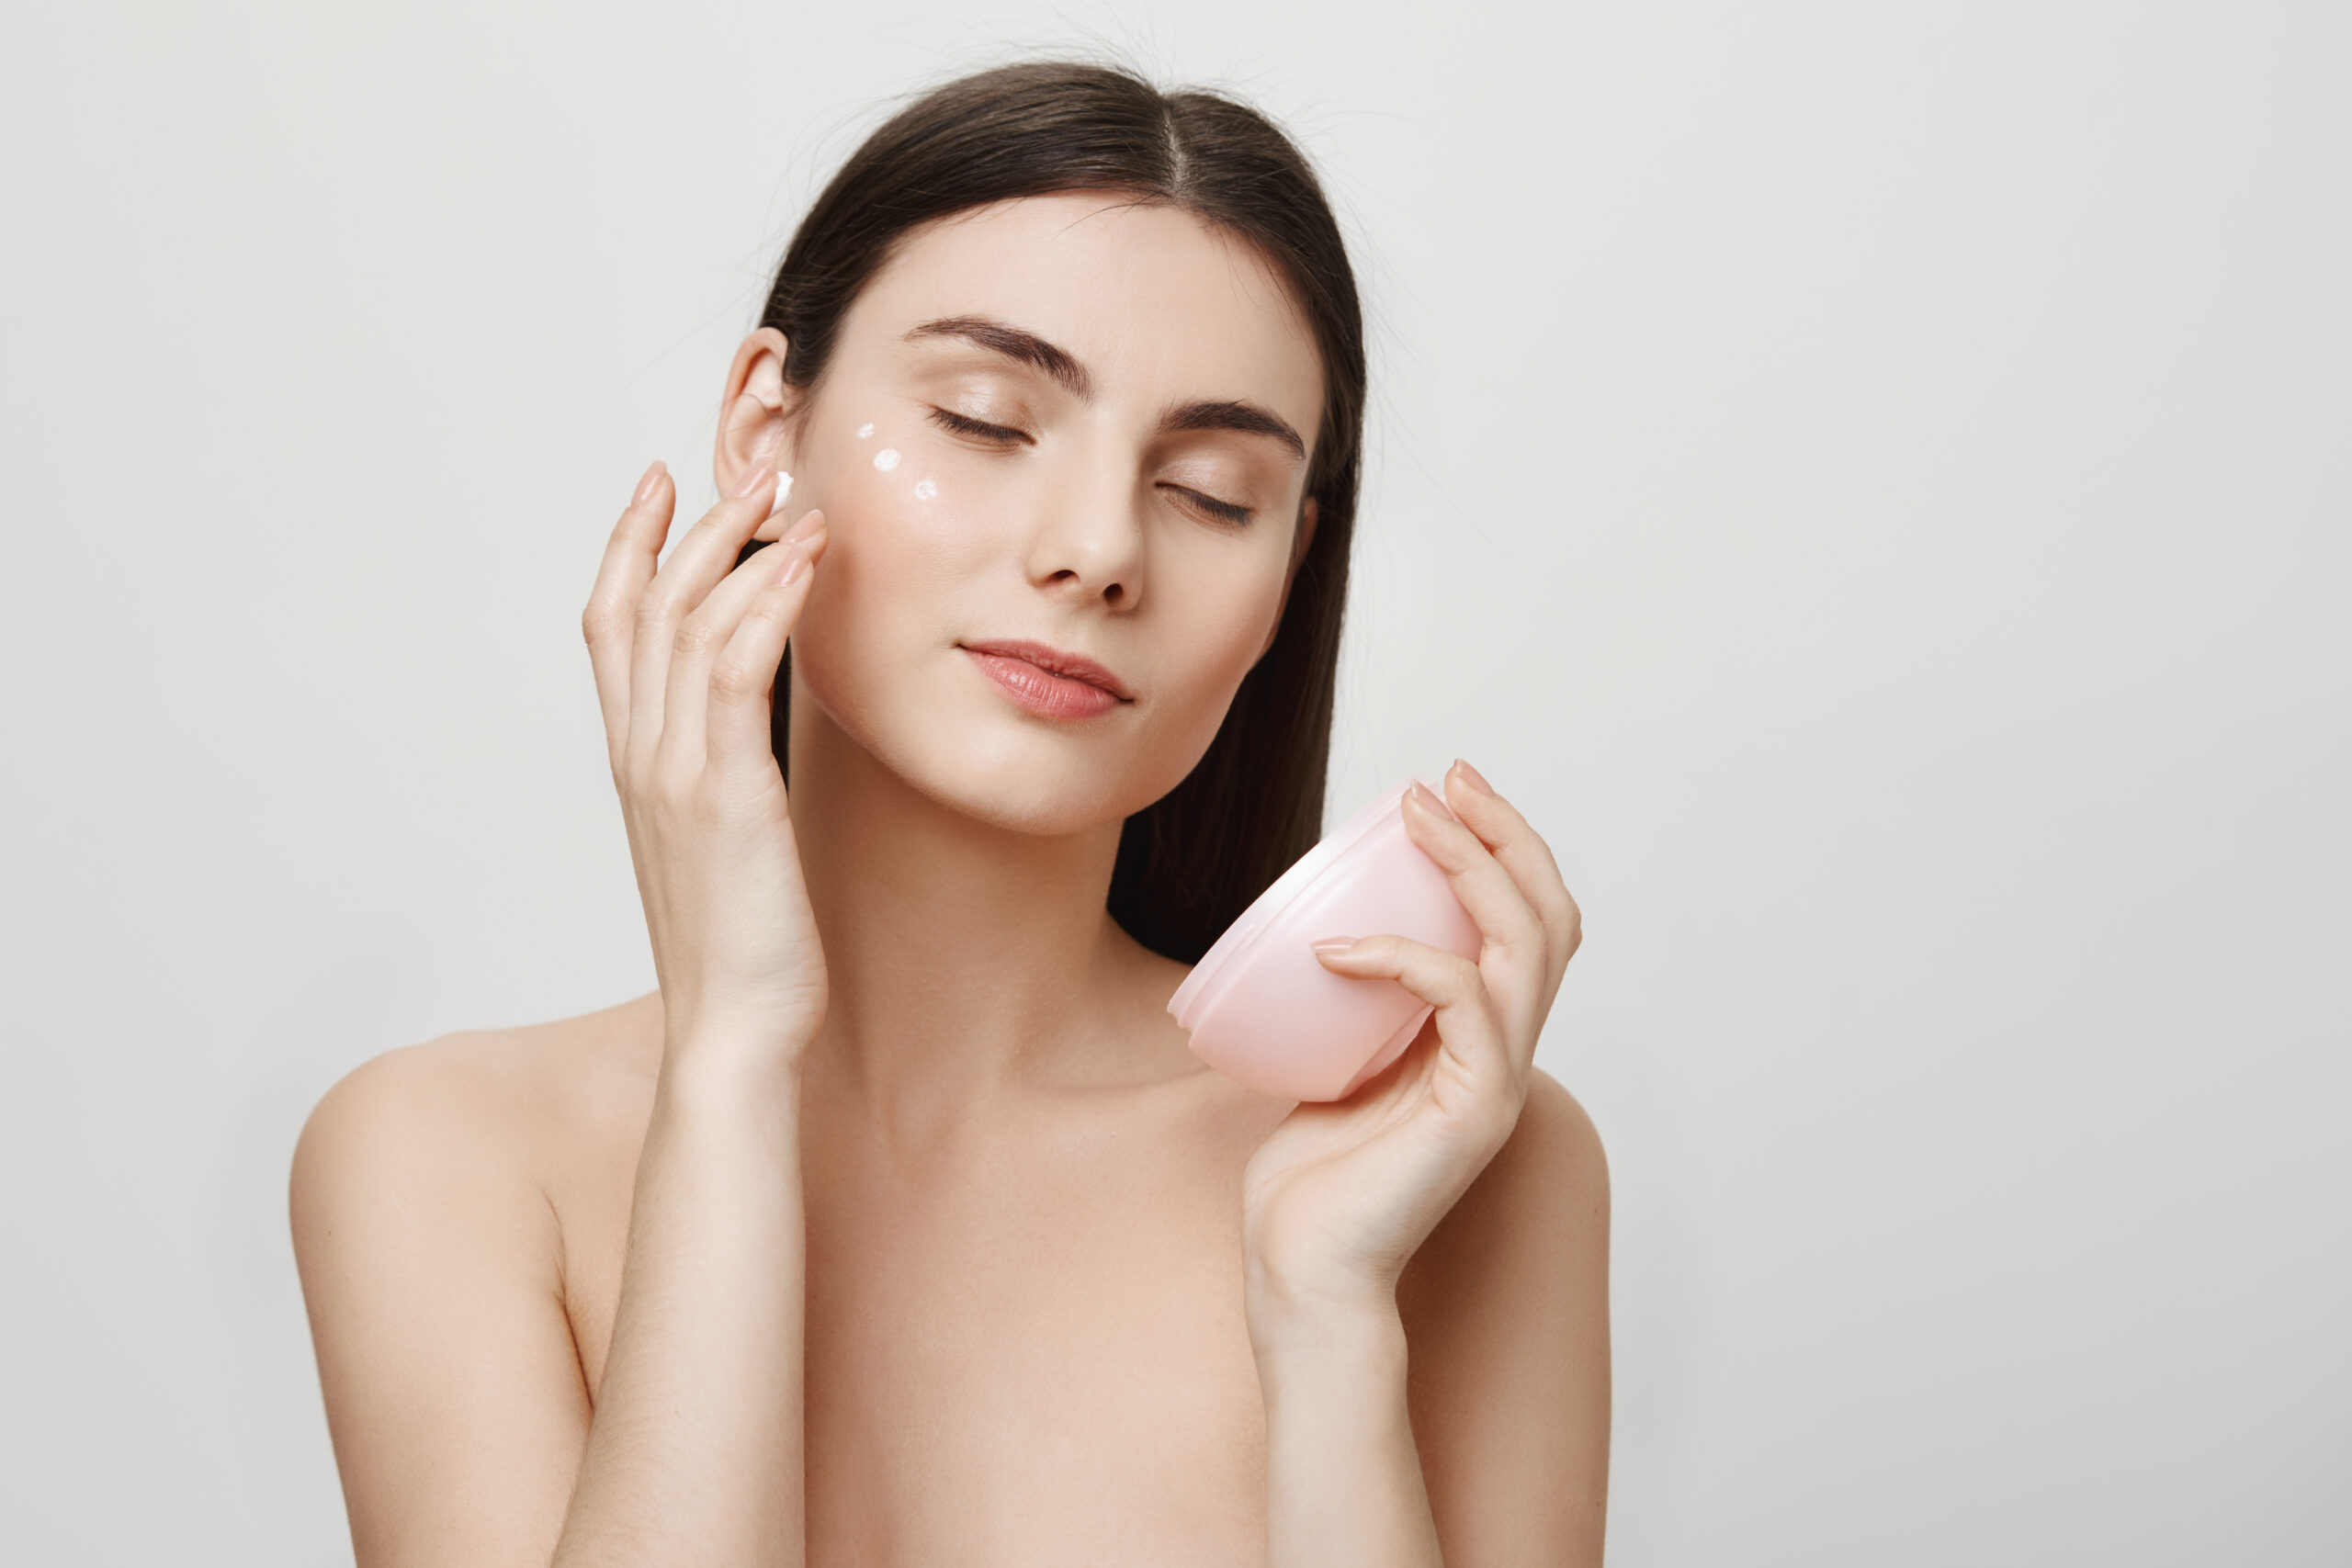 Beauty and skincare concept. Studio portrait of gentle good-looking european woman rubbing in facial cream, enjoying doing cosmetological procedures while standing over gray background.